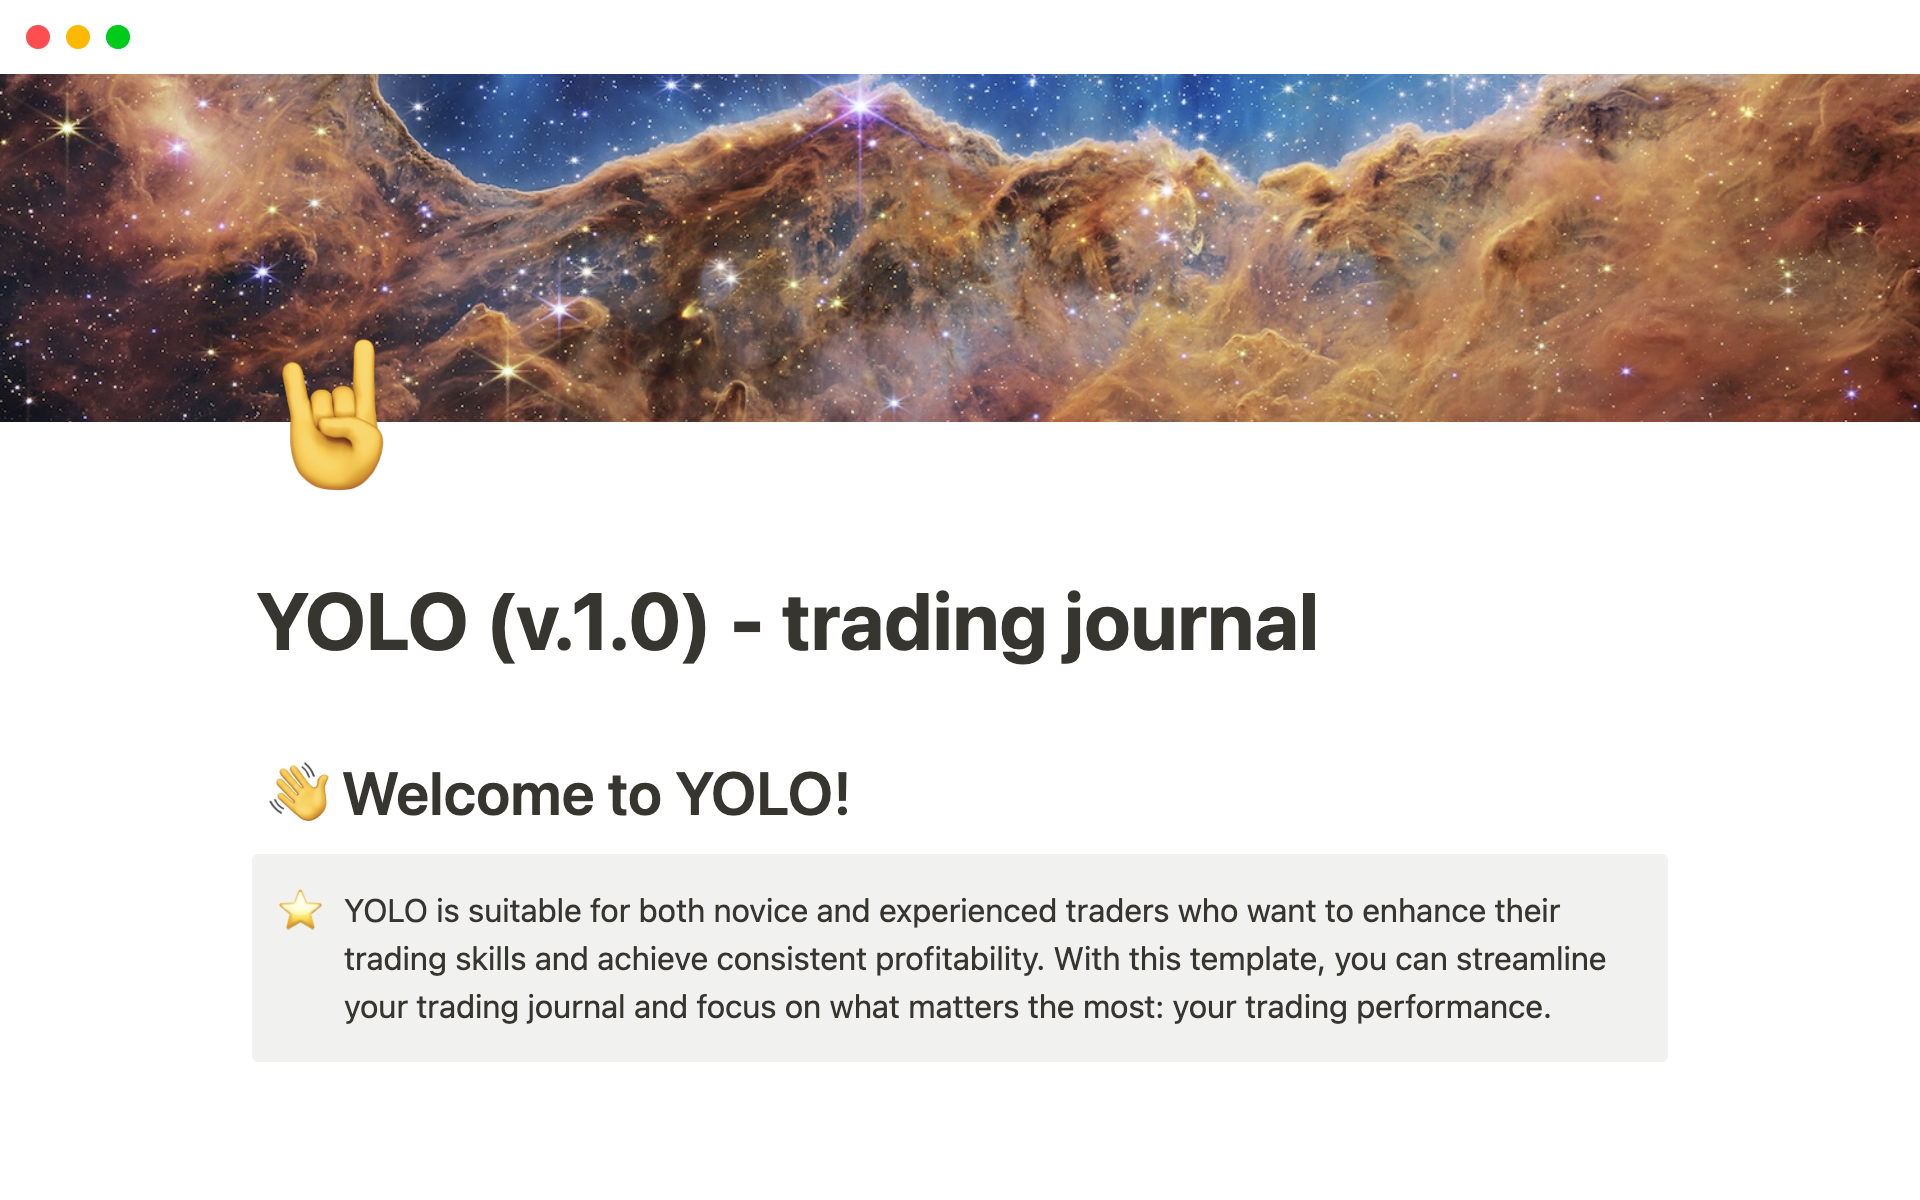 With this template, you can streamline your trading journal and focus on what matters the most: your trading performance.